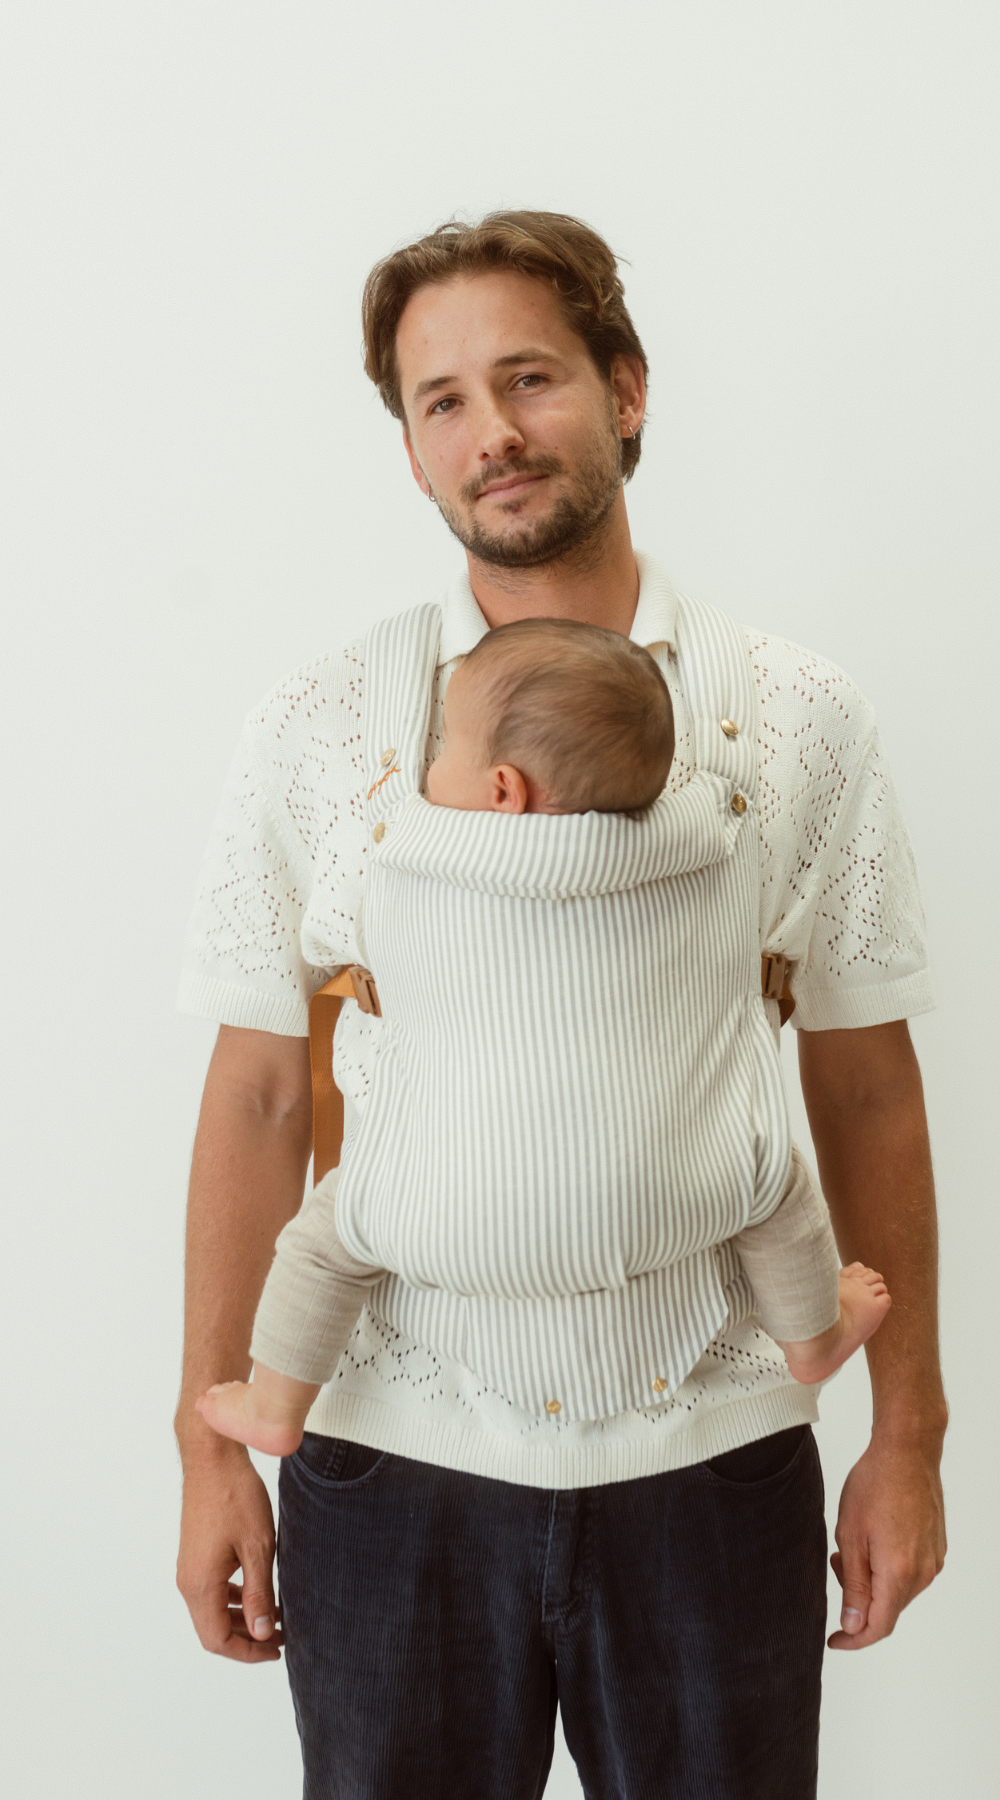 bamboo linen grey stripe baby clip carrier by chekoh australian owned and perfect for newborns and toddlers male babywearing model dad